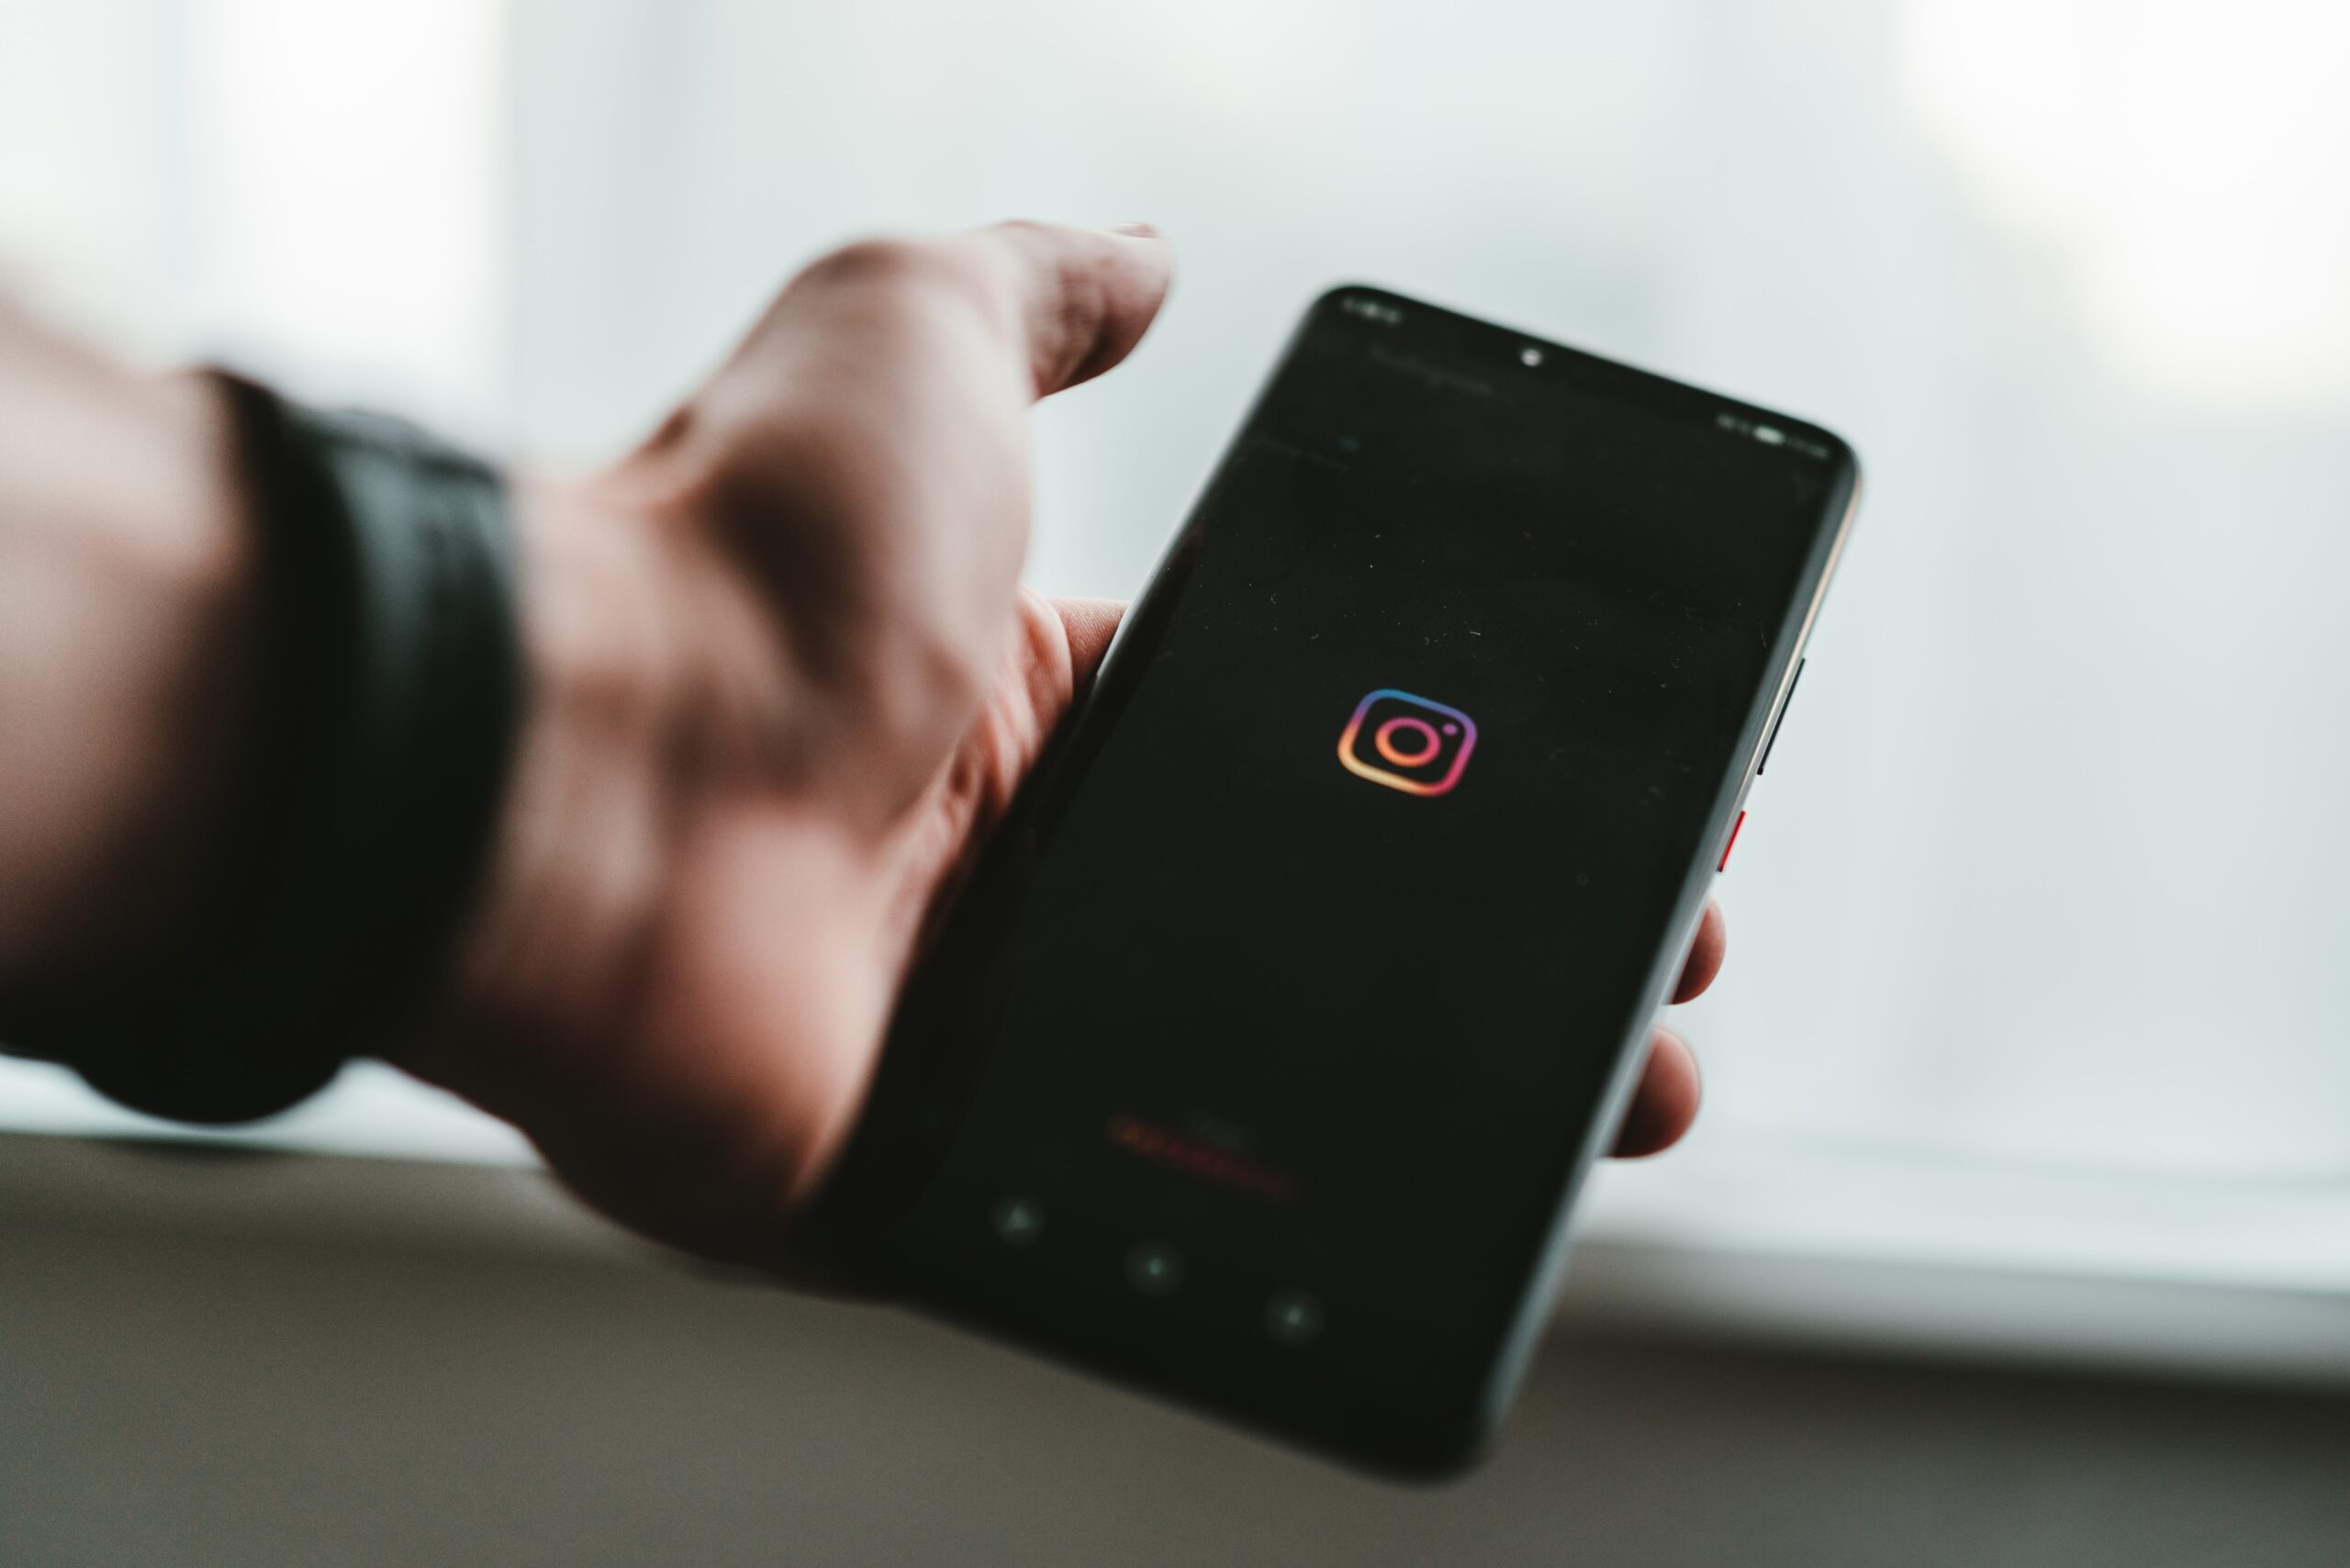 How important is video content for Instagram?